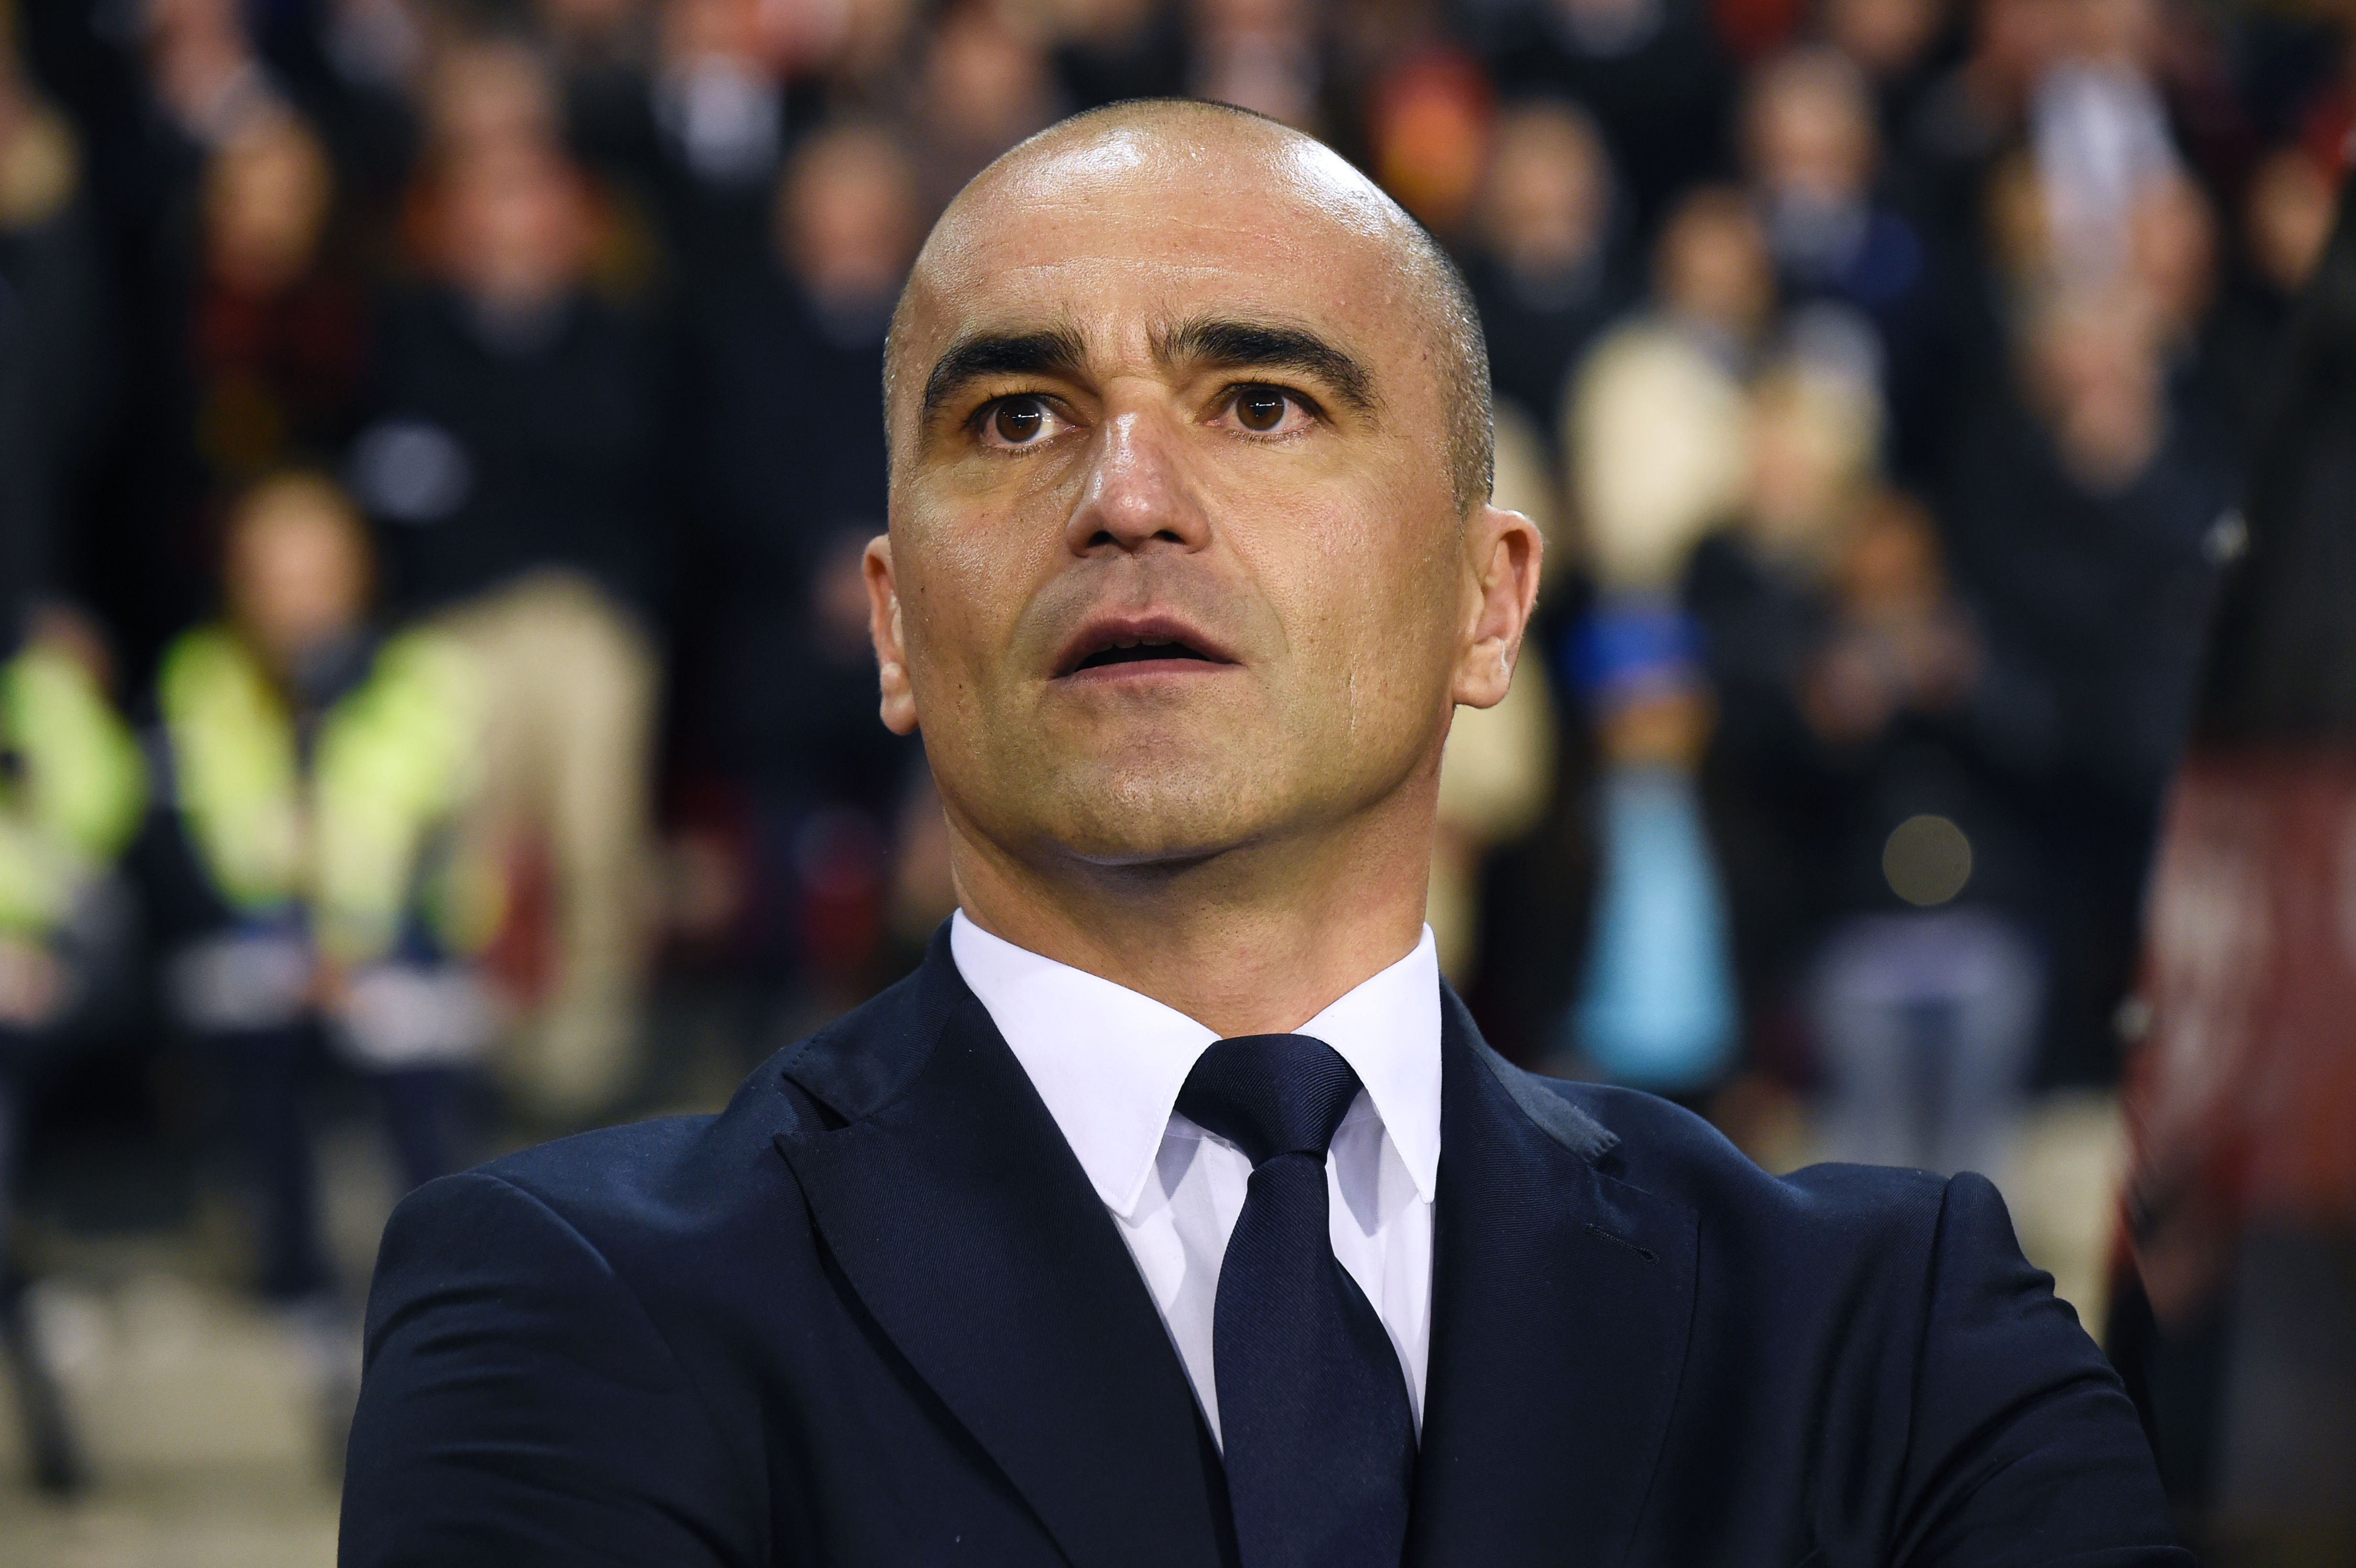 Belgium's head coach Roberto Martinez looks on during the line up for the national anthem before  the FIFA World Cup 2018 qualification football match between Belgium and Greece, at the King Baudouin Stadium, on March 25, 2017 in Brussels. / AFP PHOTO / JOHN THYS        (Photo credit should read JOHN THYS/AFP/Getty Images)